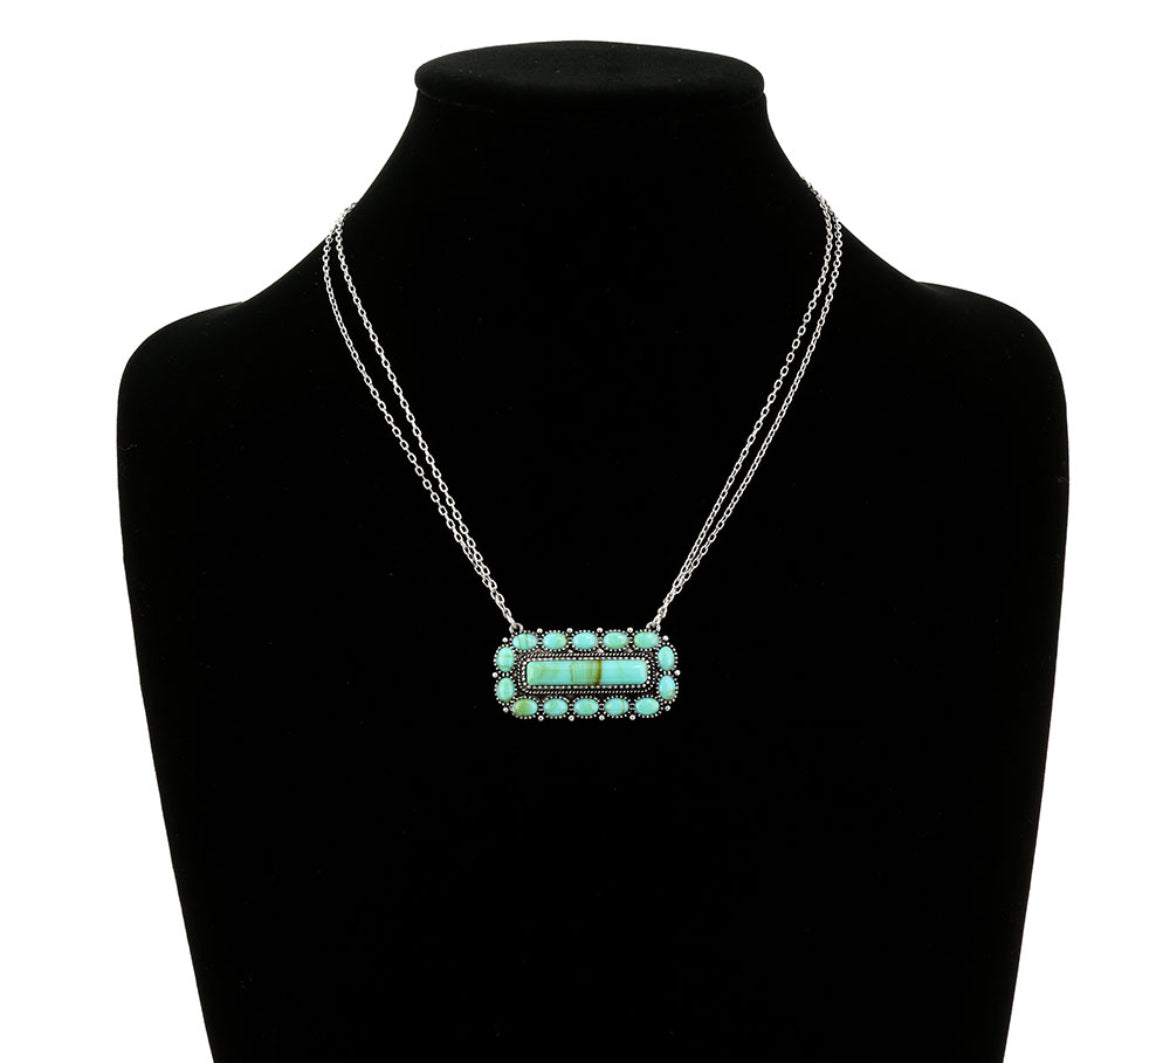 Big Texas Turquoise Bar Necklace